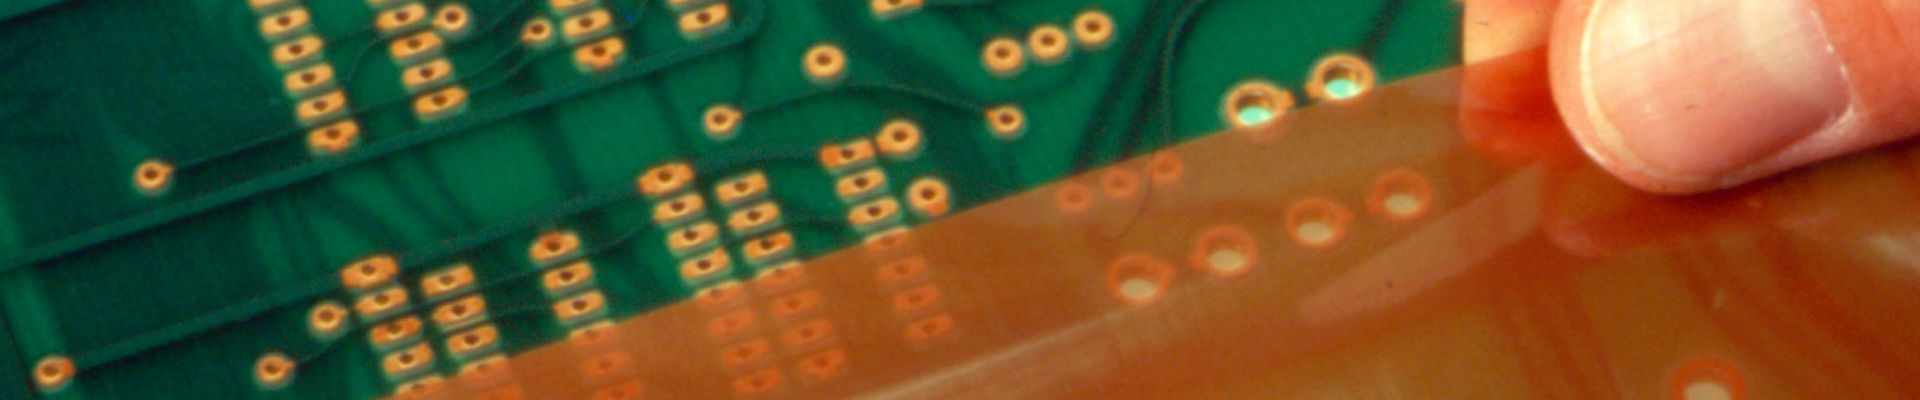 Man's fingers apply pressure-sensitive-adhesive protective film to an electronic circuit board. 